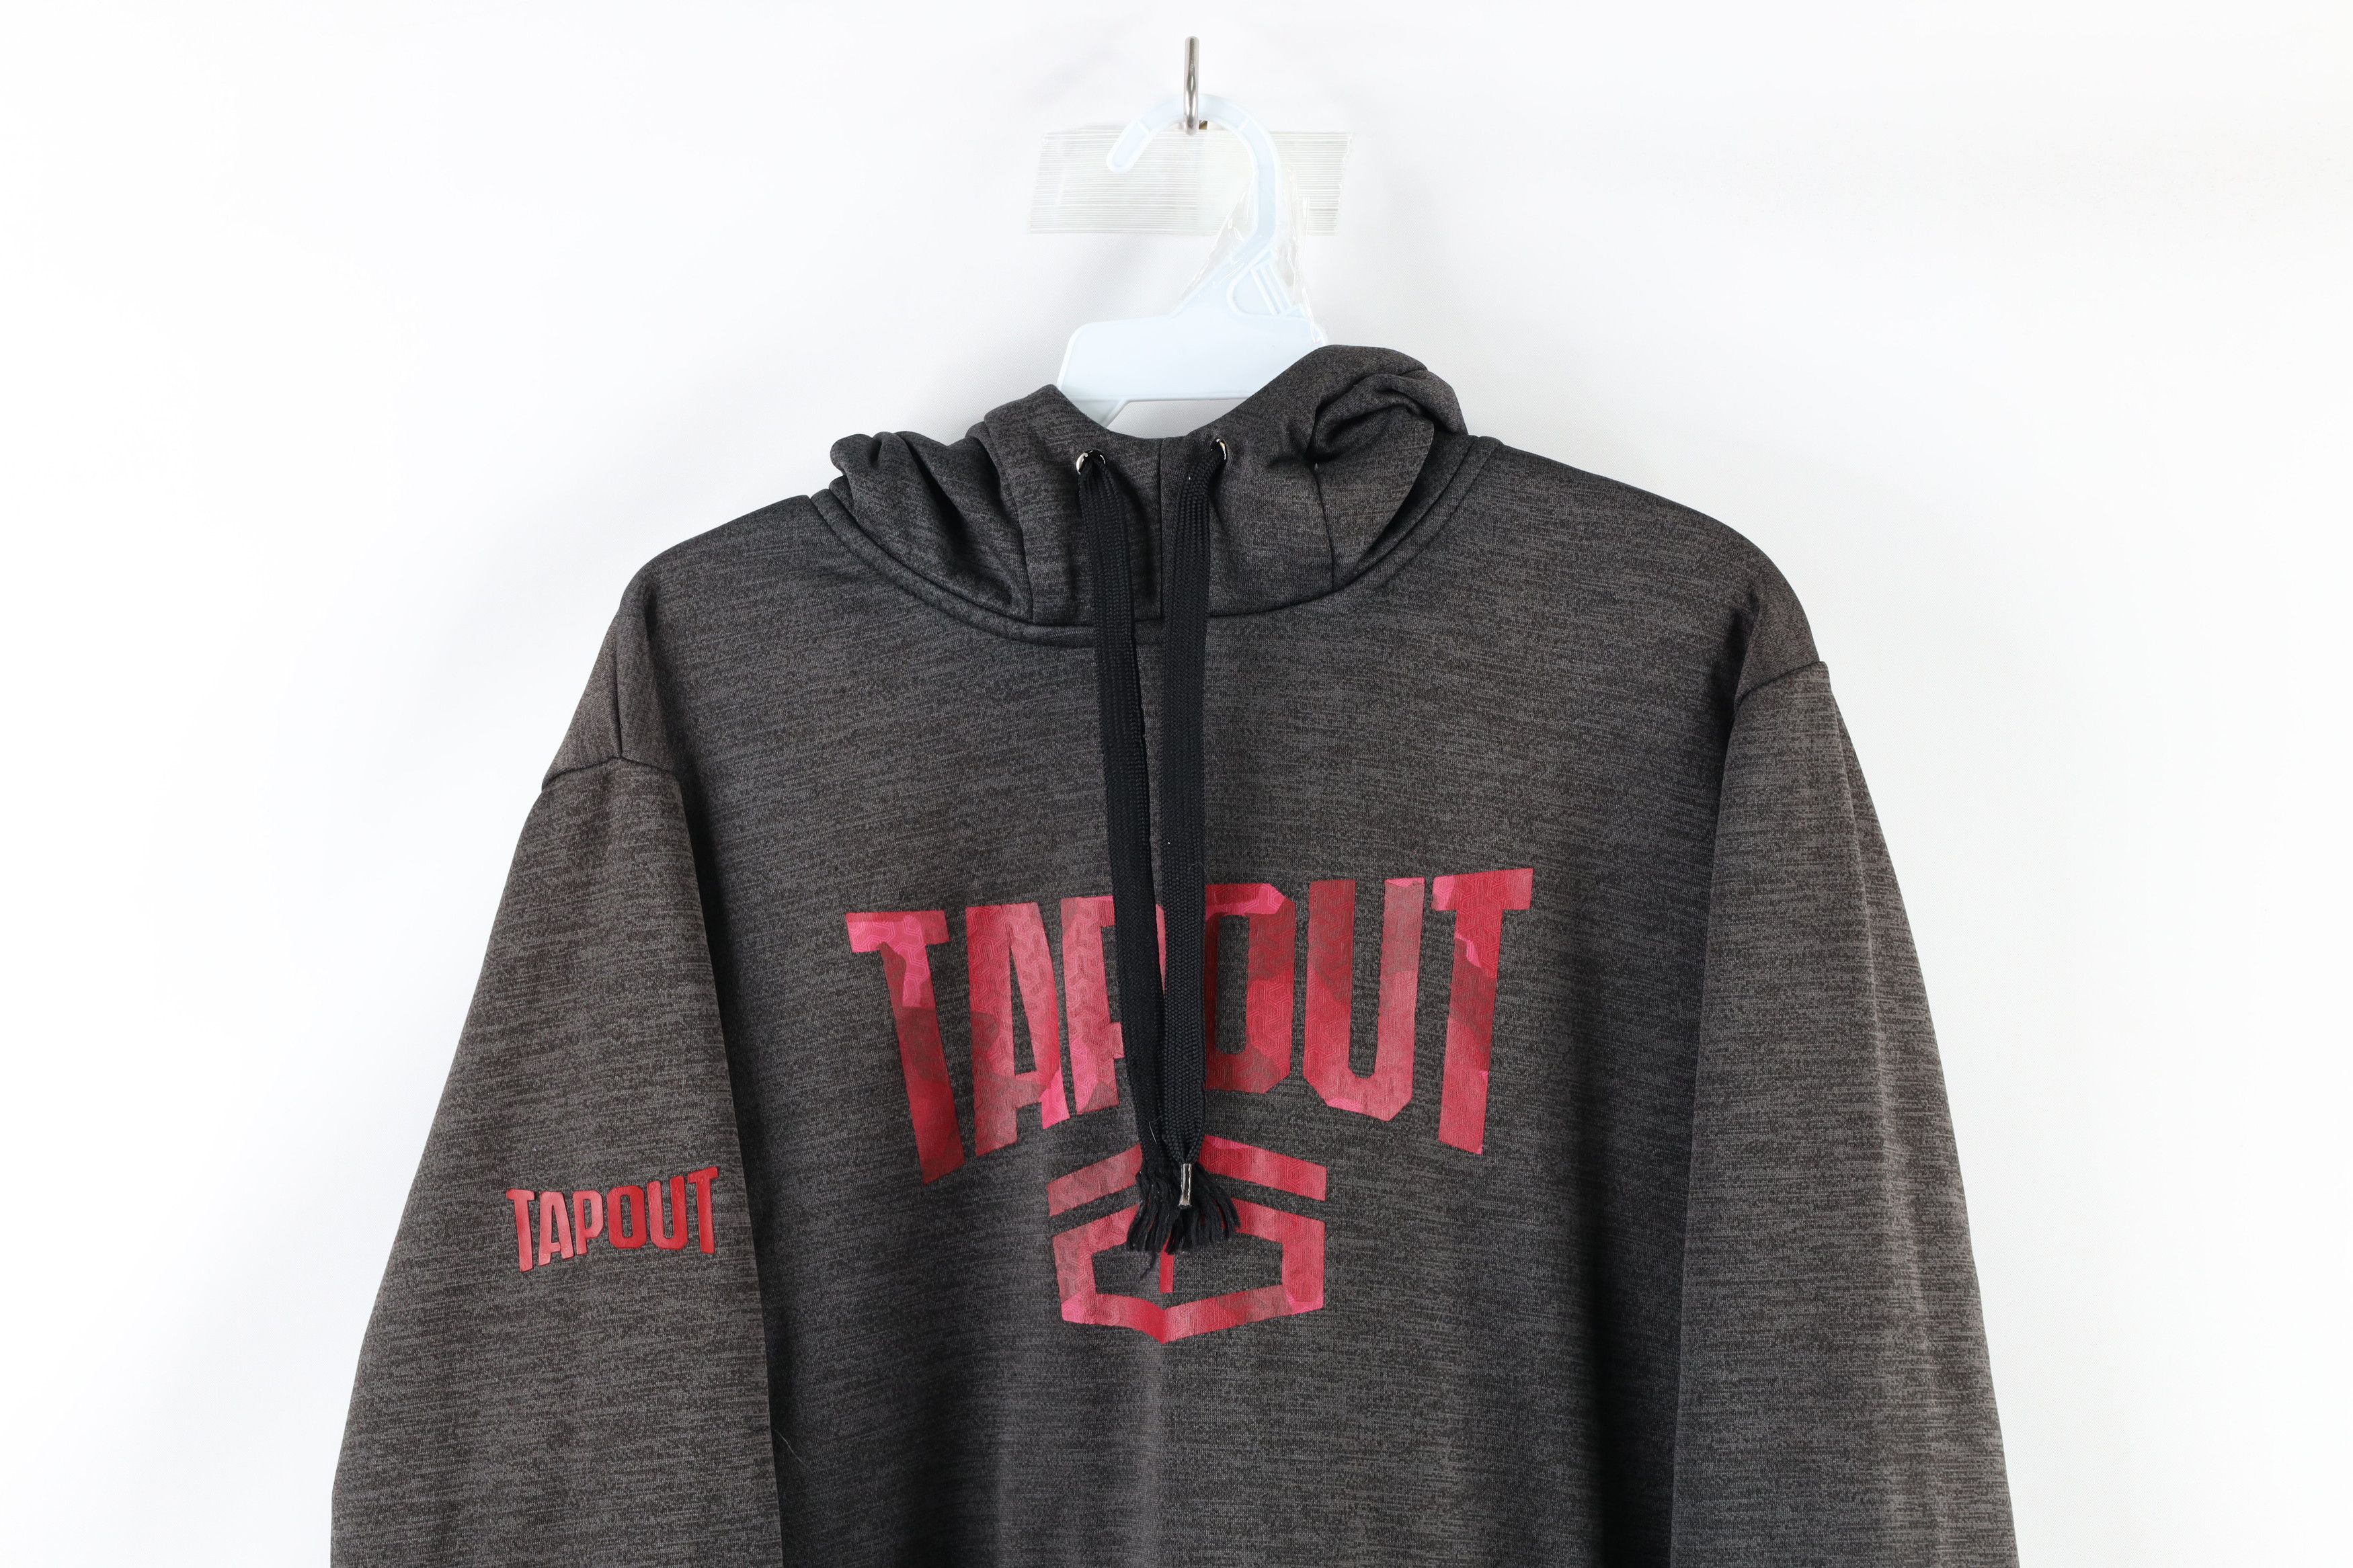 Vintage Tapout UFC MMA Fighting Out Hoodie Sweatshirt Heather Gray Size US M / EU 48-50 / 2 - 2 Preview